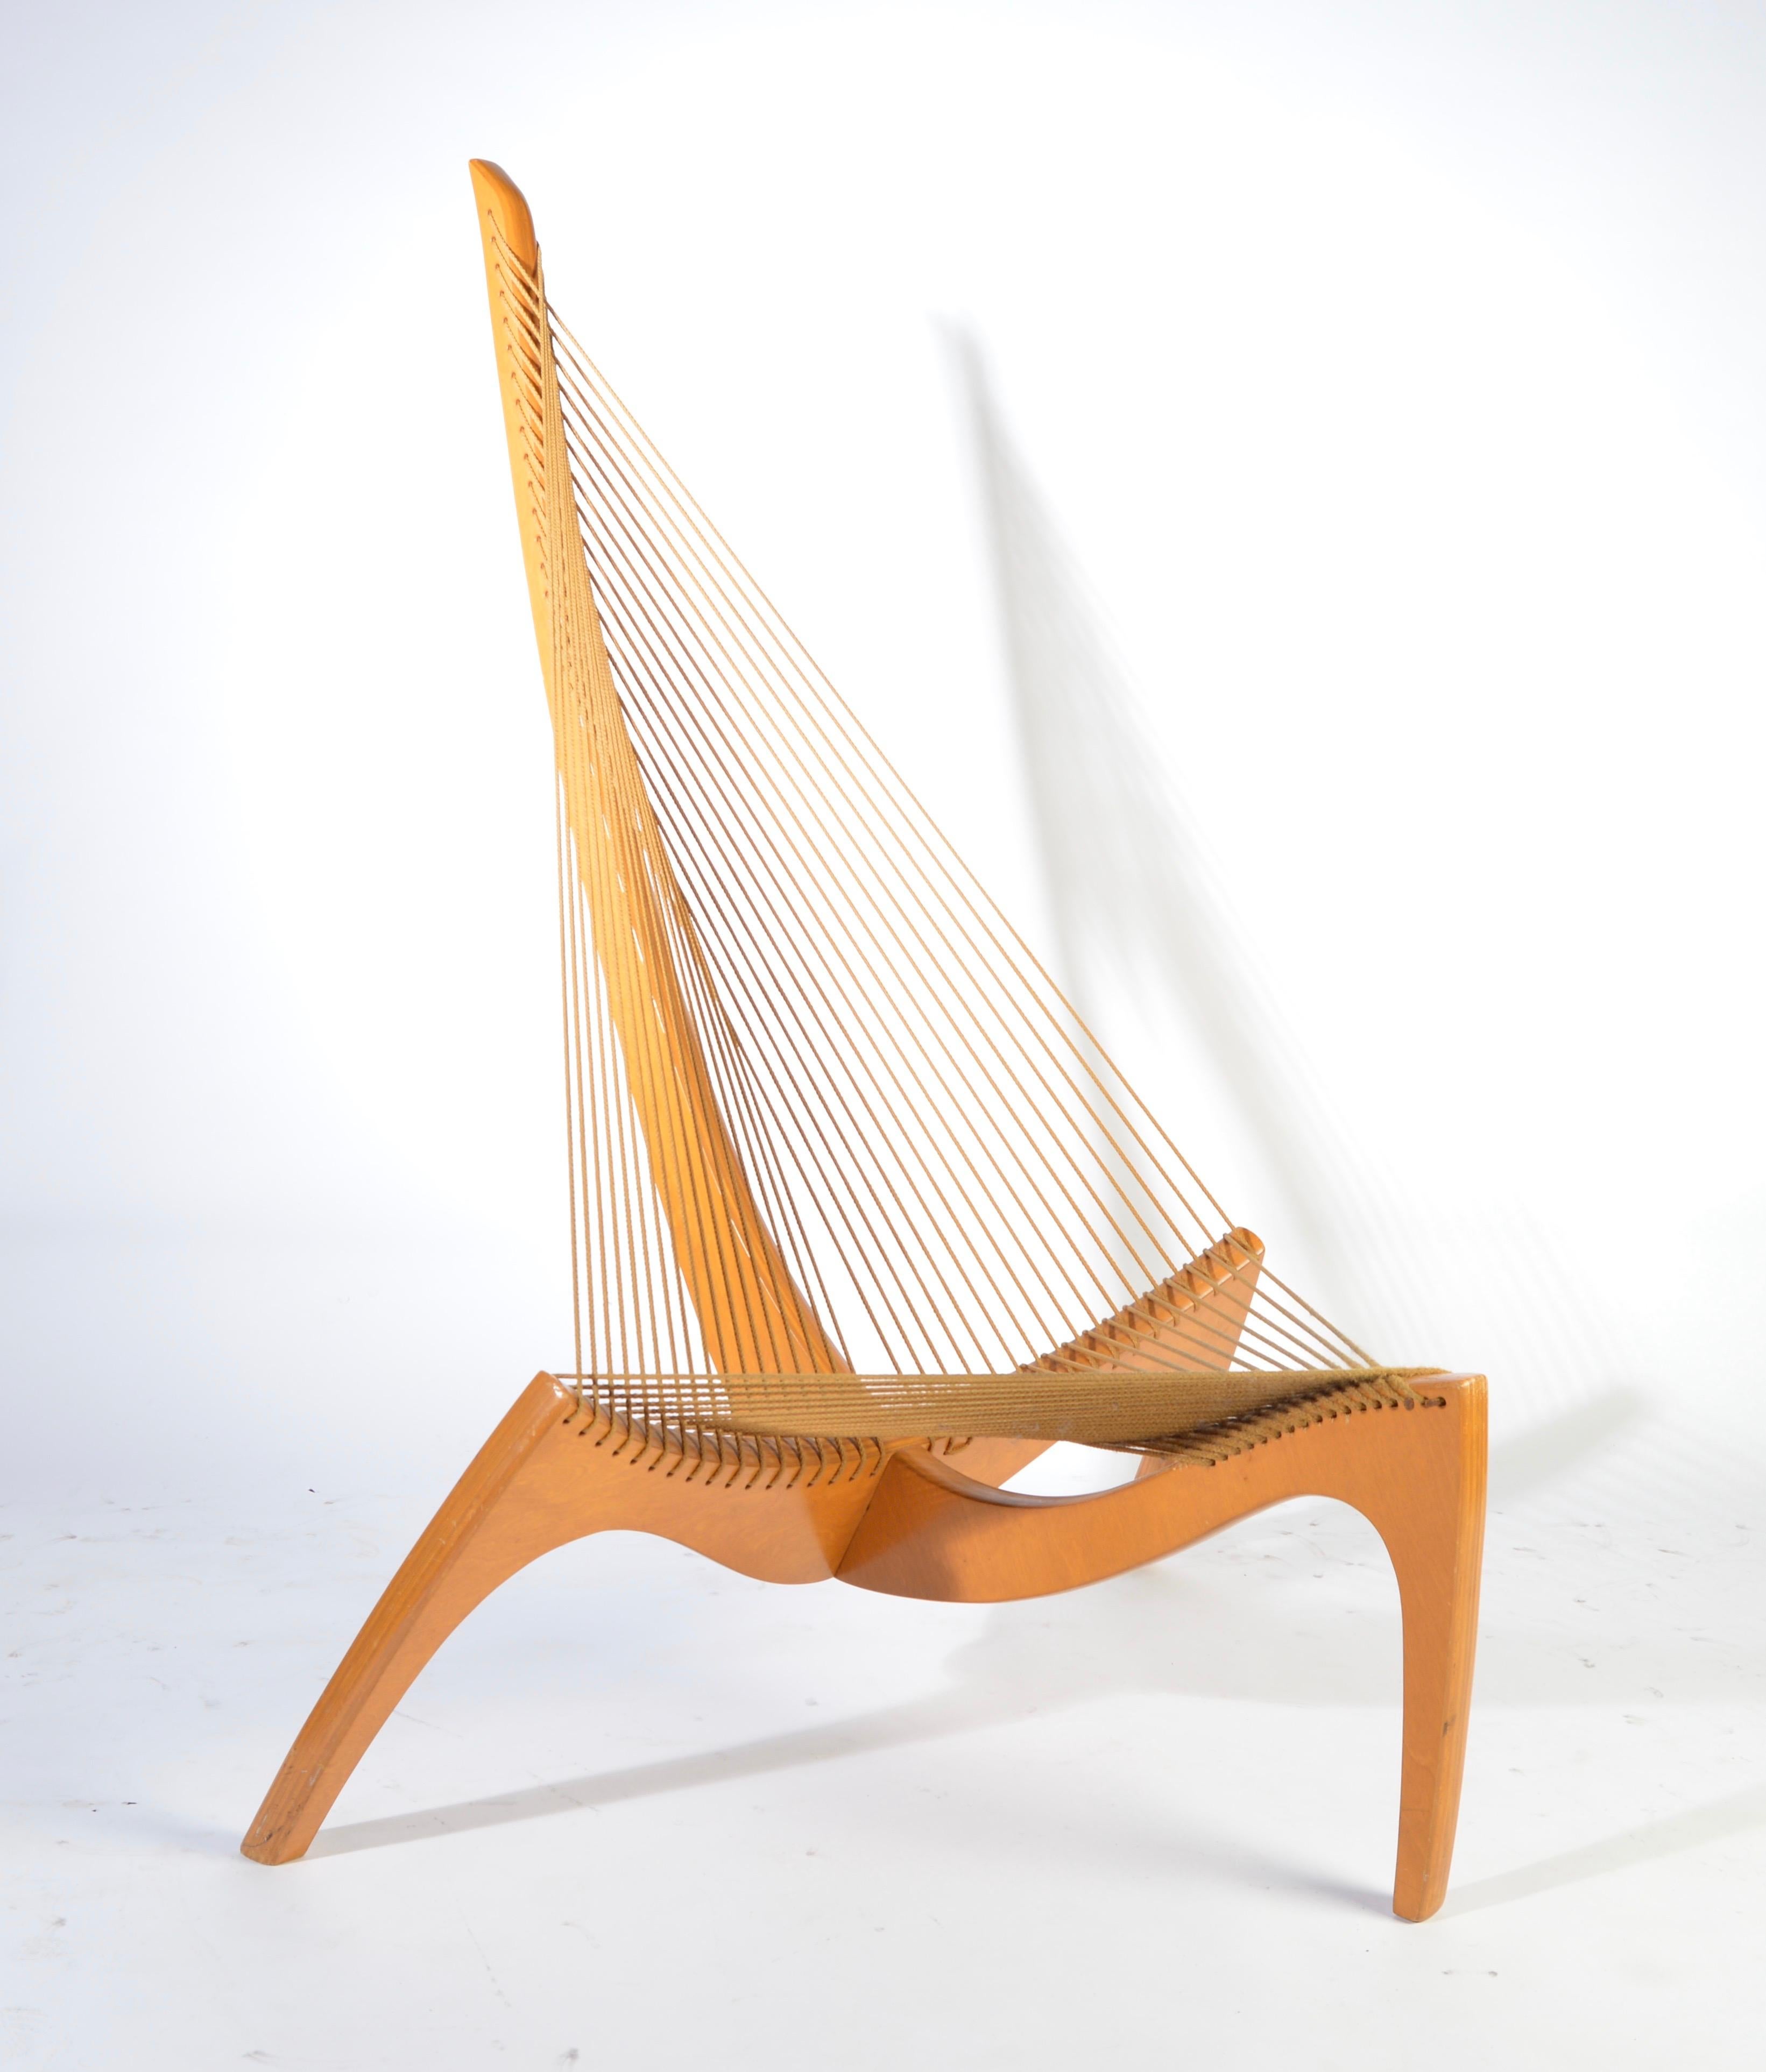 Early Jorgen Hovelskov, Christensen & Larsen “Harp Chair” designed in 1963 
Ash, flagline
Very nice overall condition having typical signs of age and use. Solid with very good flagline cording. See images for detailed condition report. 
Measures: